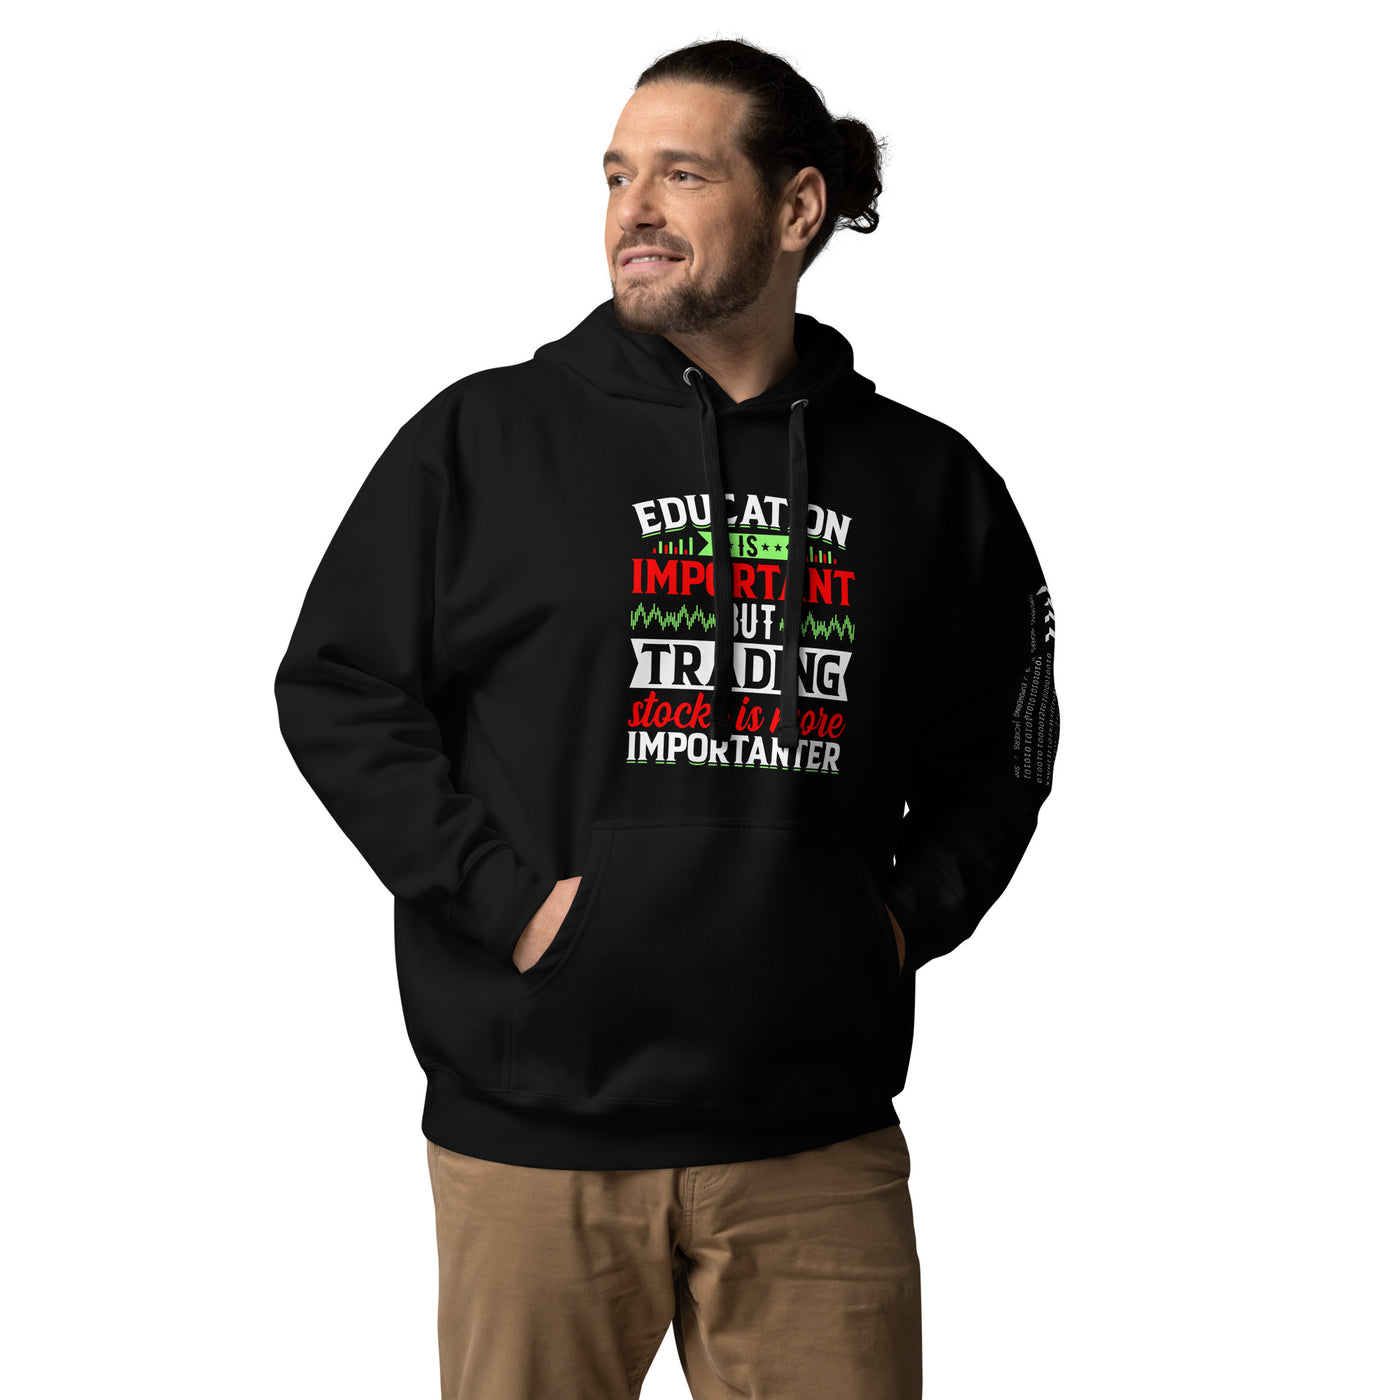 Education is important but trading stocks is more importanter - Unisex Hoodie